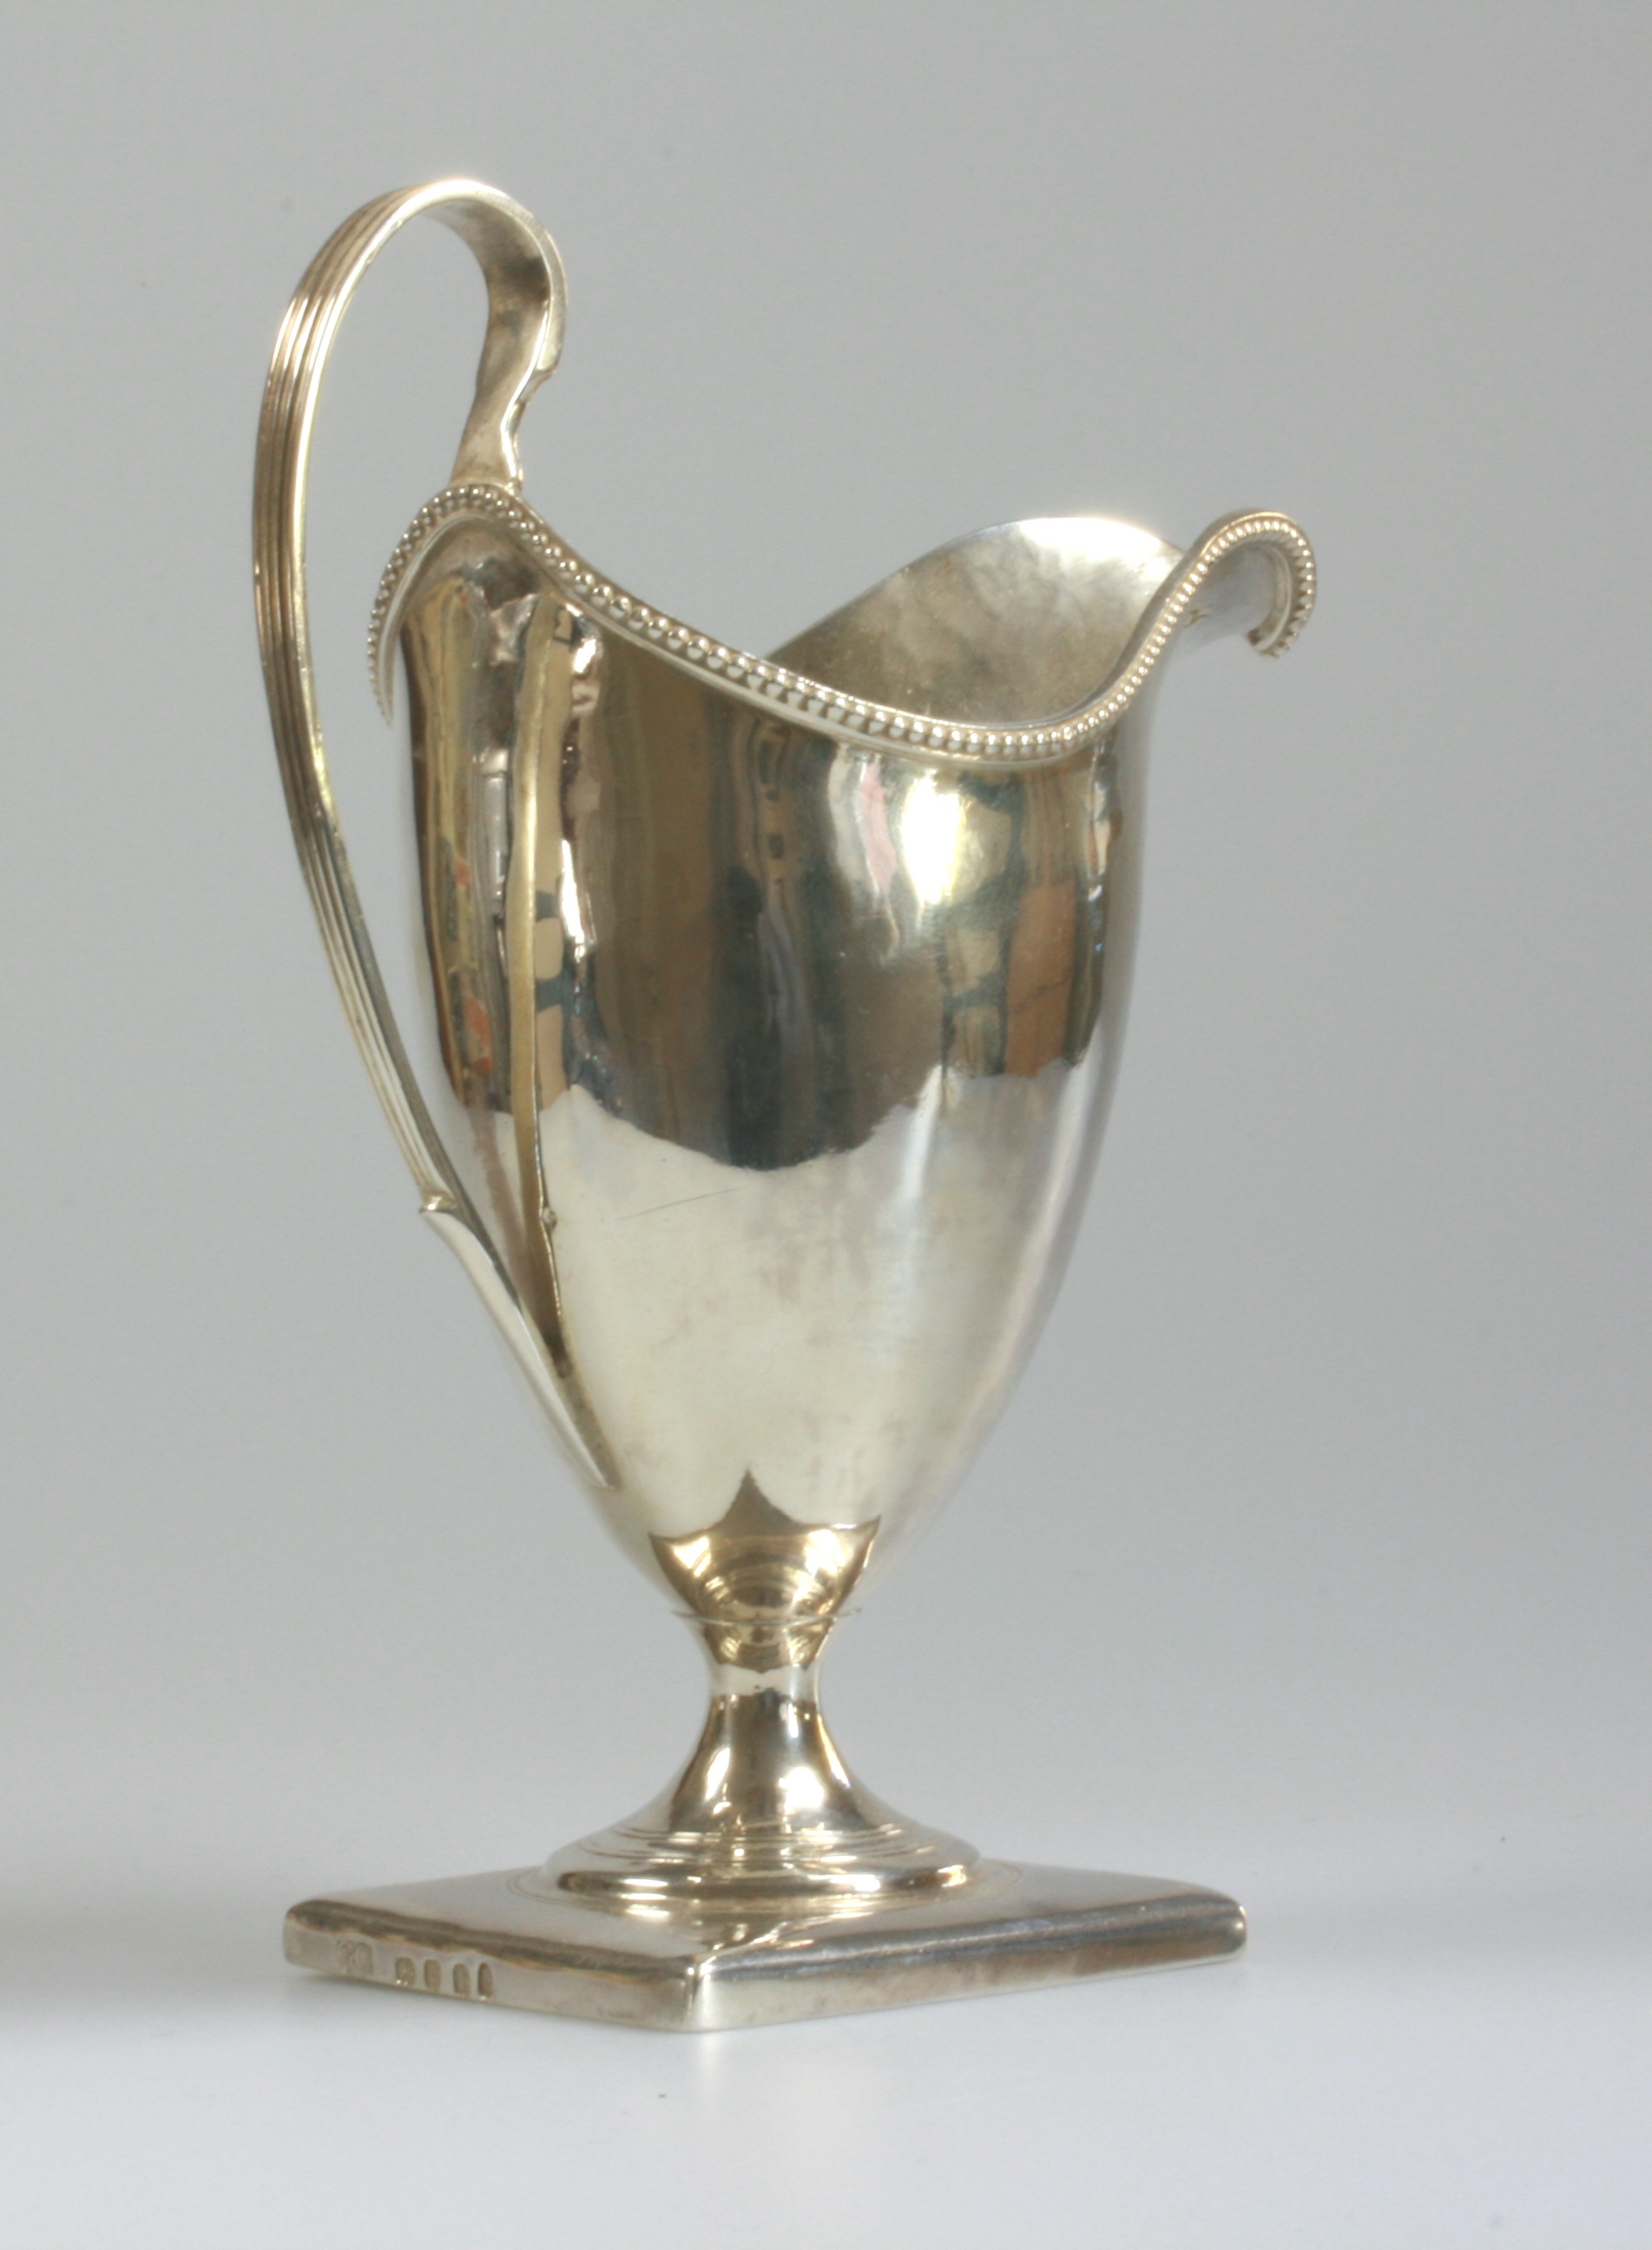 A George III Silver Helmet Shaped Cream Jug. George Cowles, London 1792. Engraved with initials